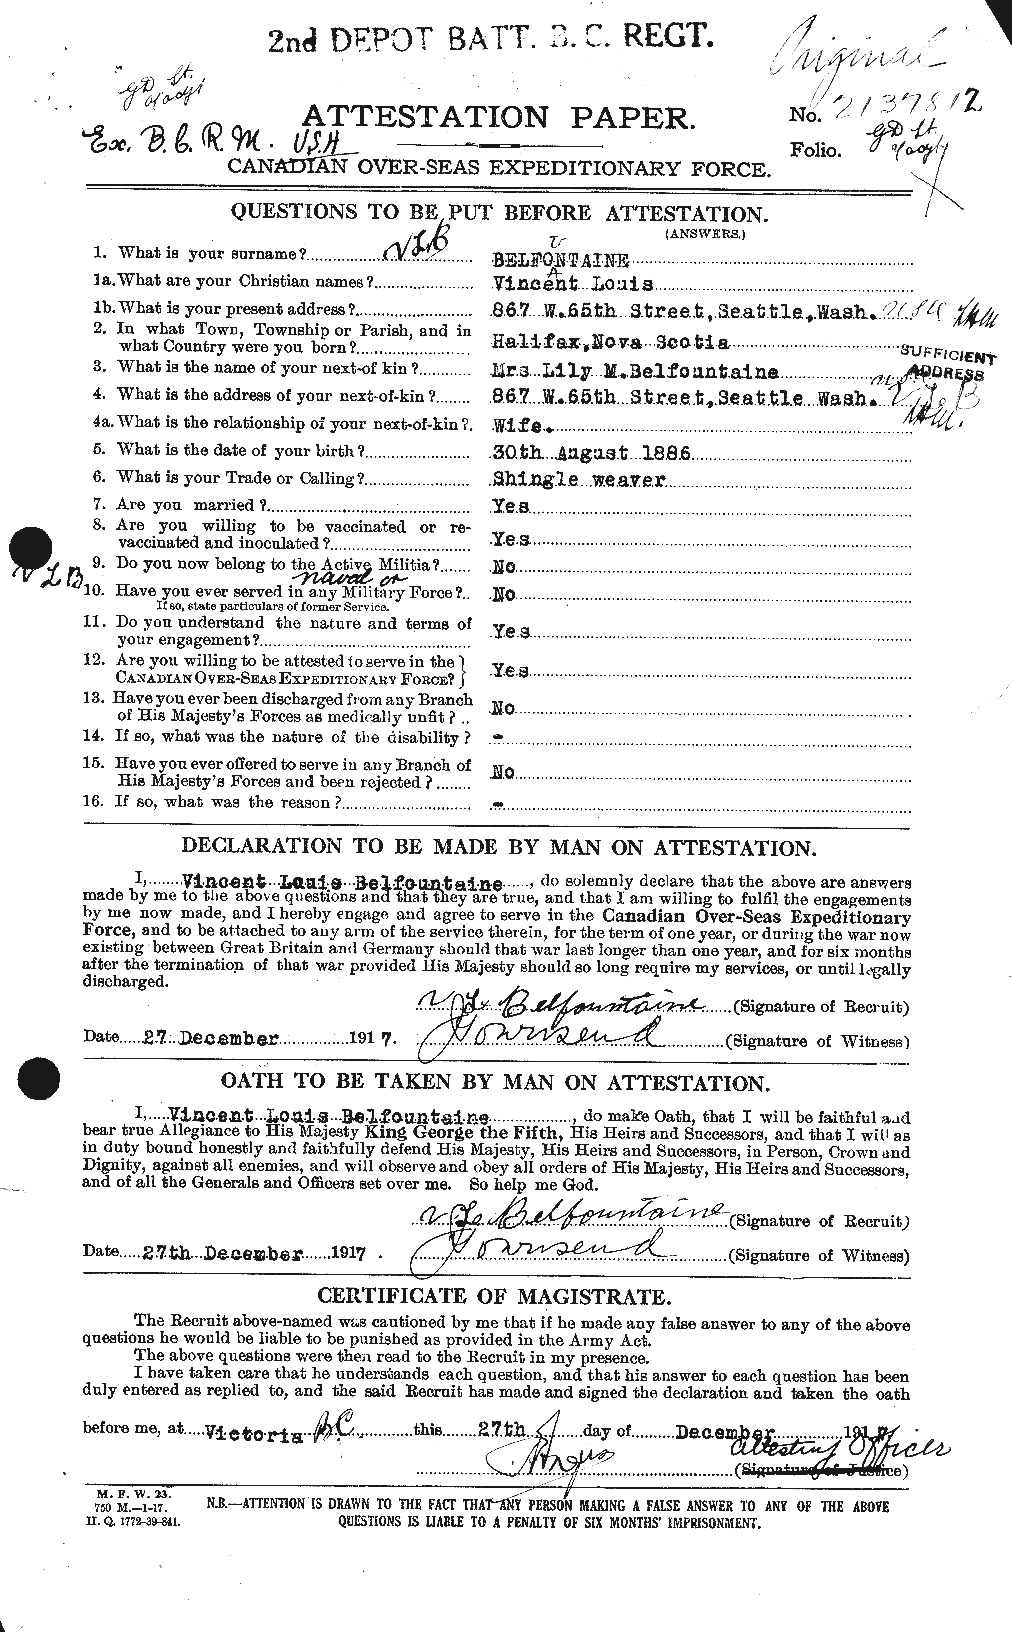 Personnel Records of the First World War - CEF 232457a